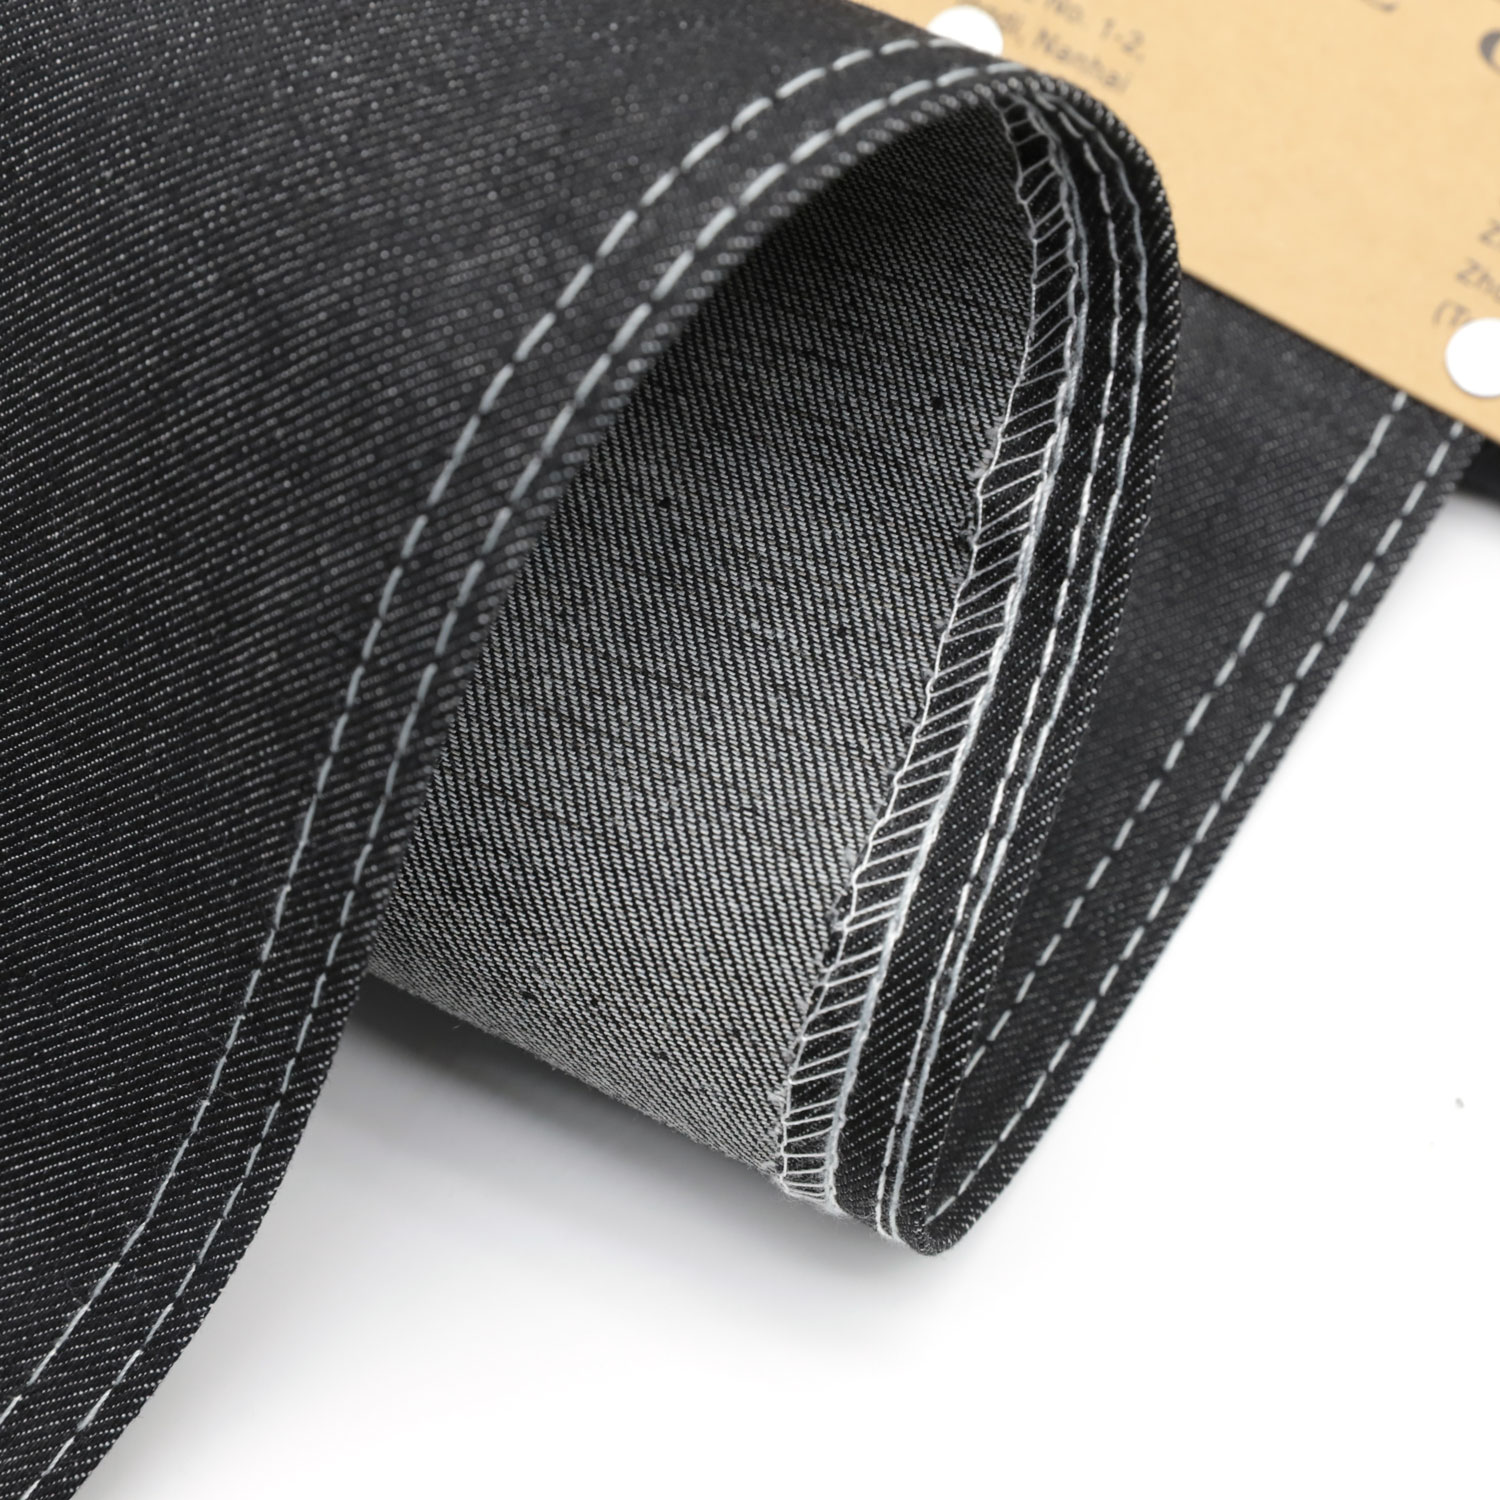 The Basics of Using the Non-stretch Denim Fabric 2